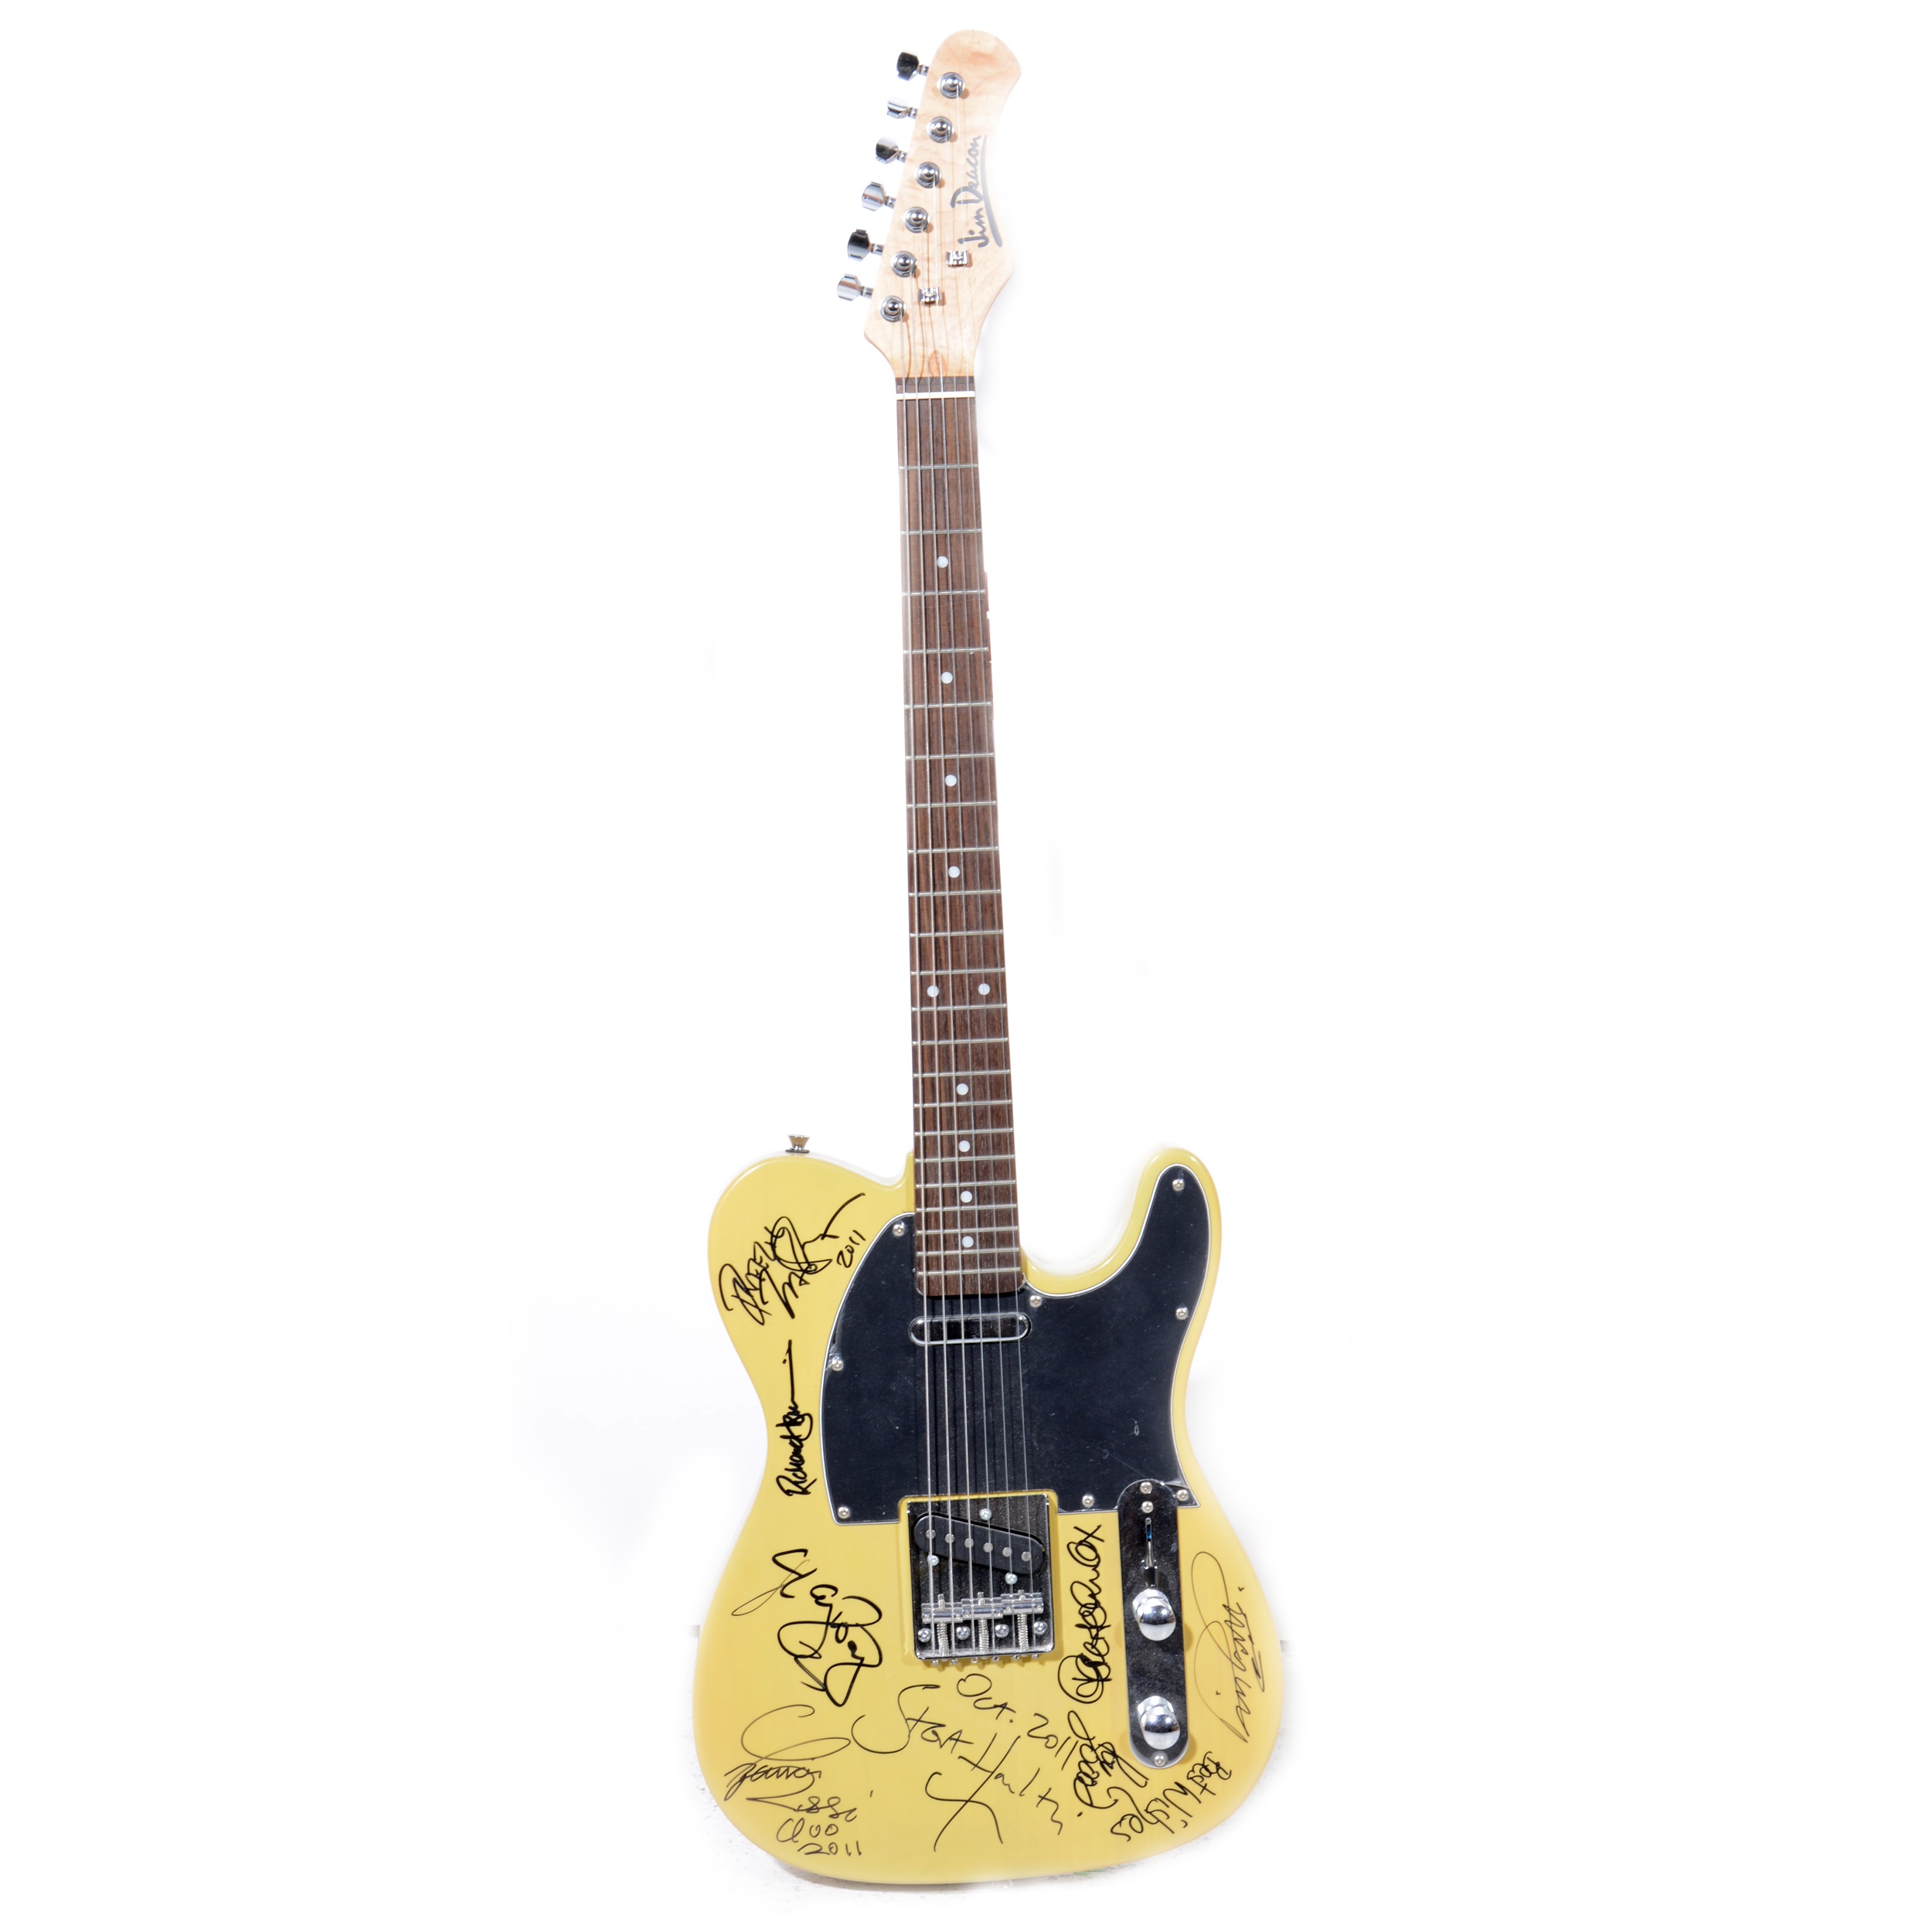 Jim Deacon Fender Telecaster style guitar, bearing signatures from Status Quo, Go West and others.